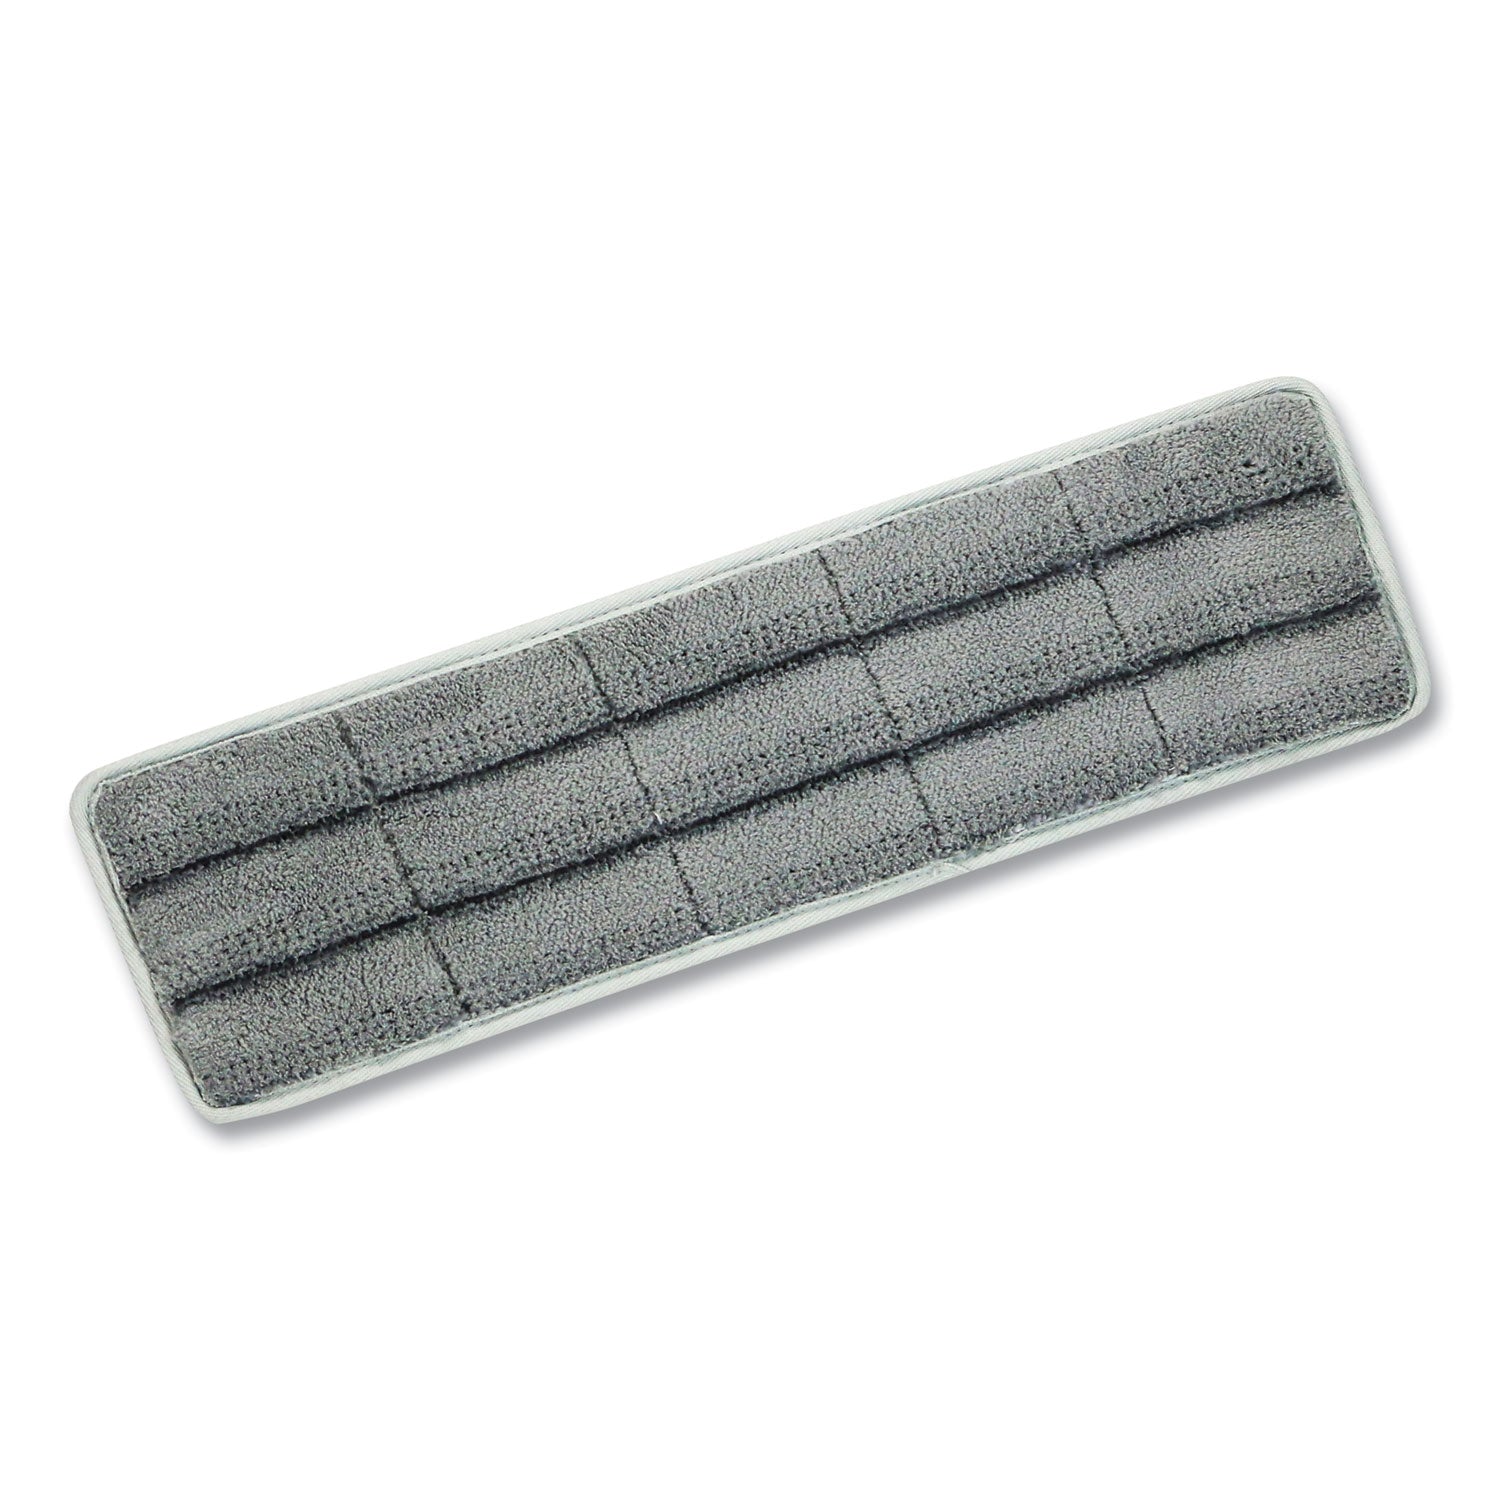 omniclean-microfiber-pads-16-gray-5-pack_ungclmfp - 2